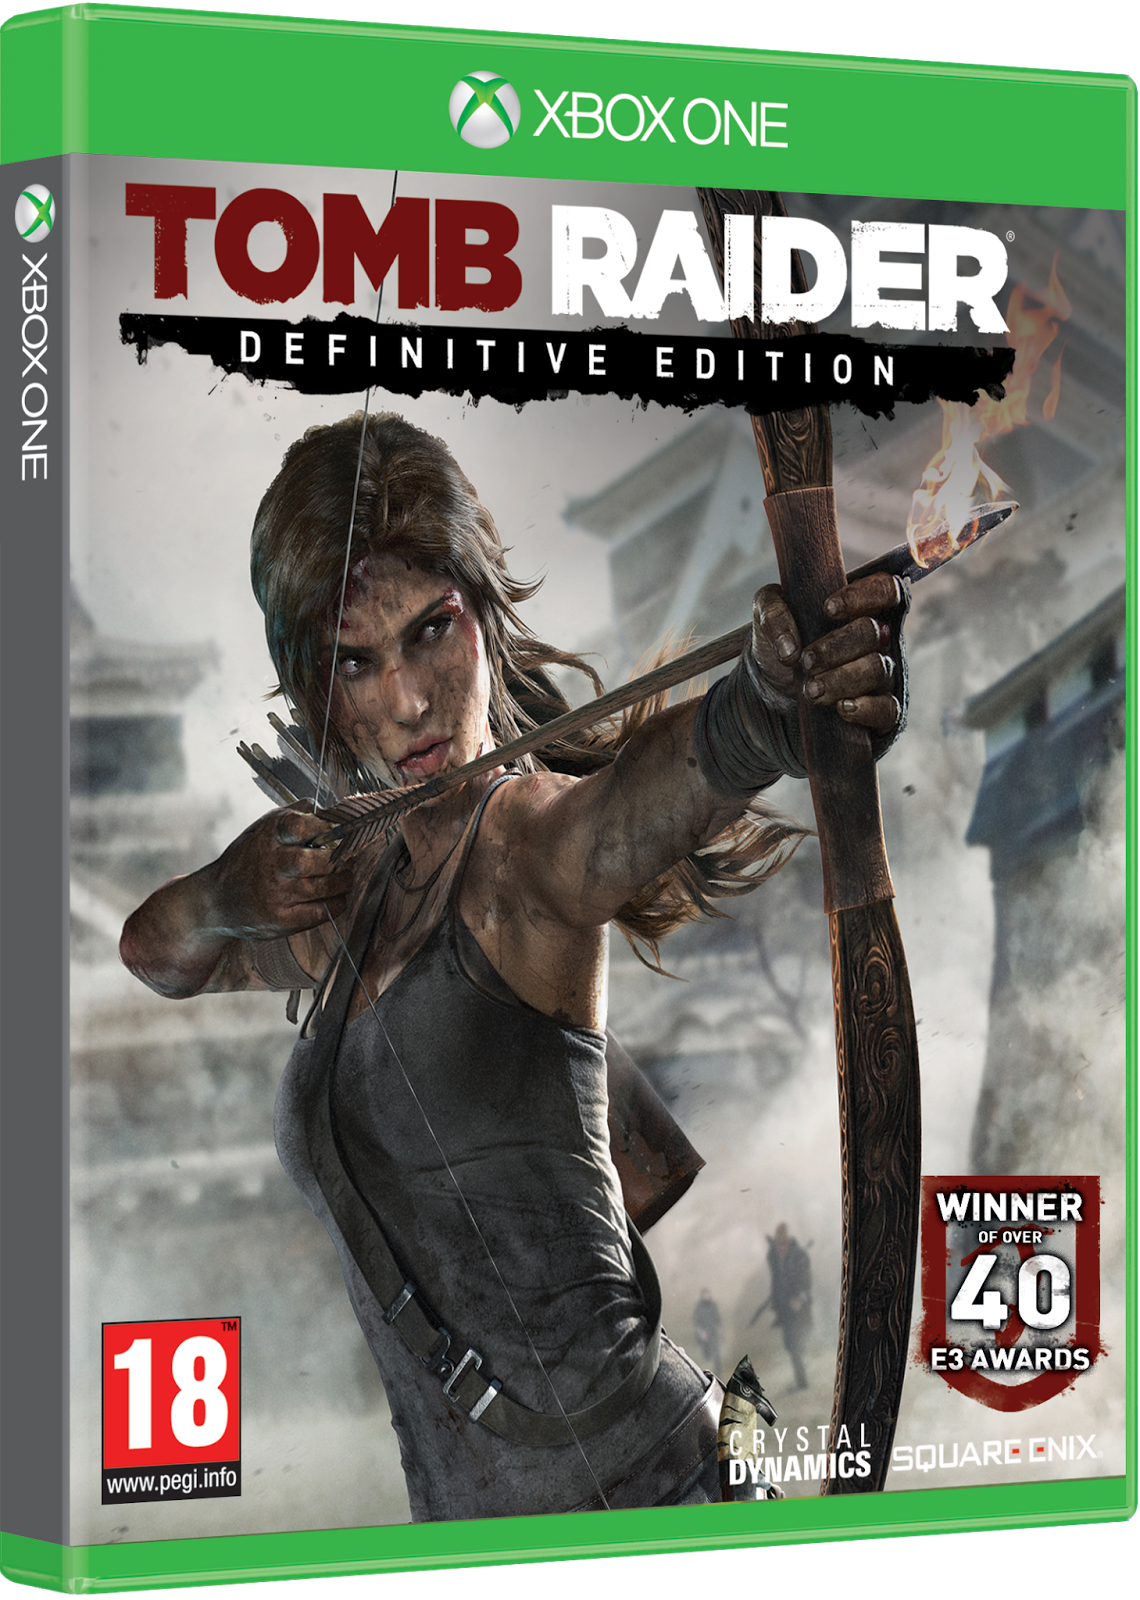 The Definitive Edition Of Tomb Raider Coming To PlayStation 4 and Xbox One - We Know ...1140 x 1600